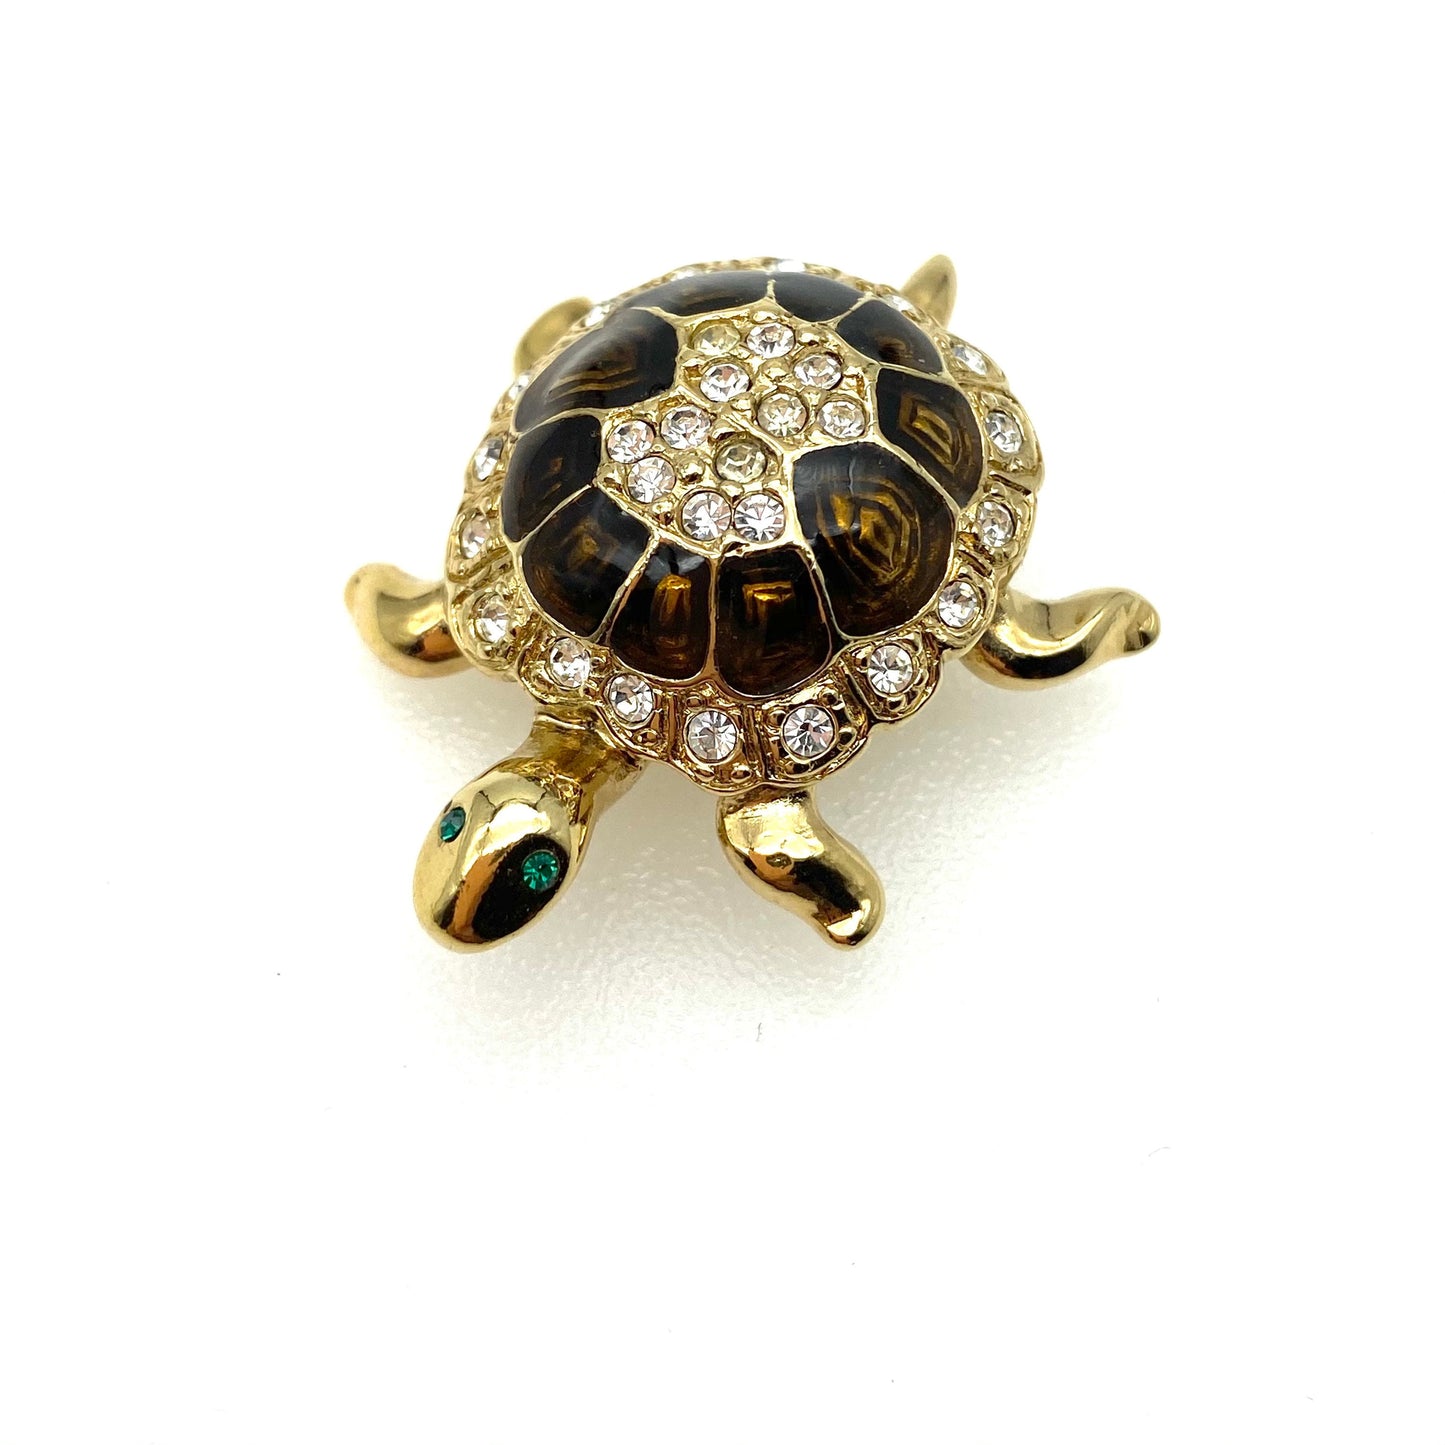 Attwood and Sawyer 22ct Gold Plated Enamel and Swarovski Crystal Turtle Tortoise (Rare Colourway)